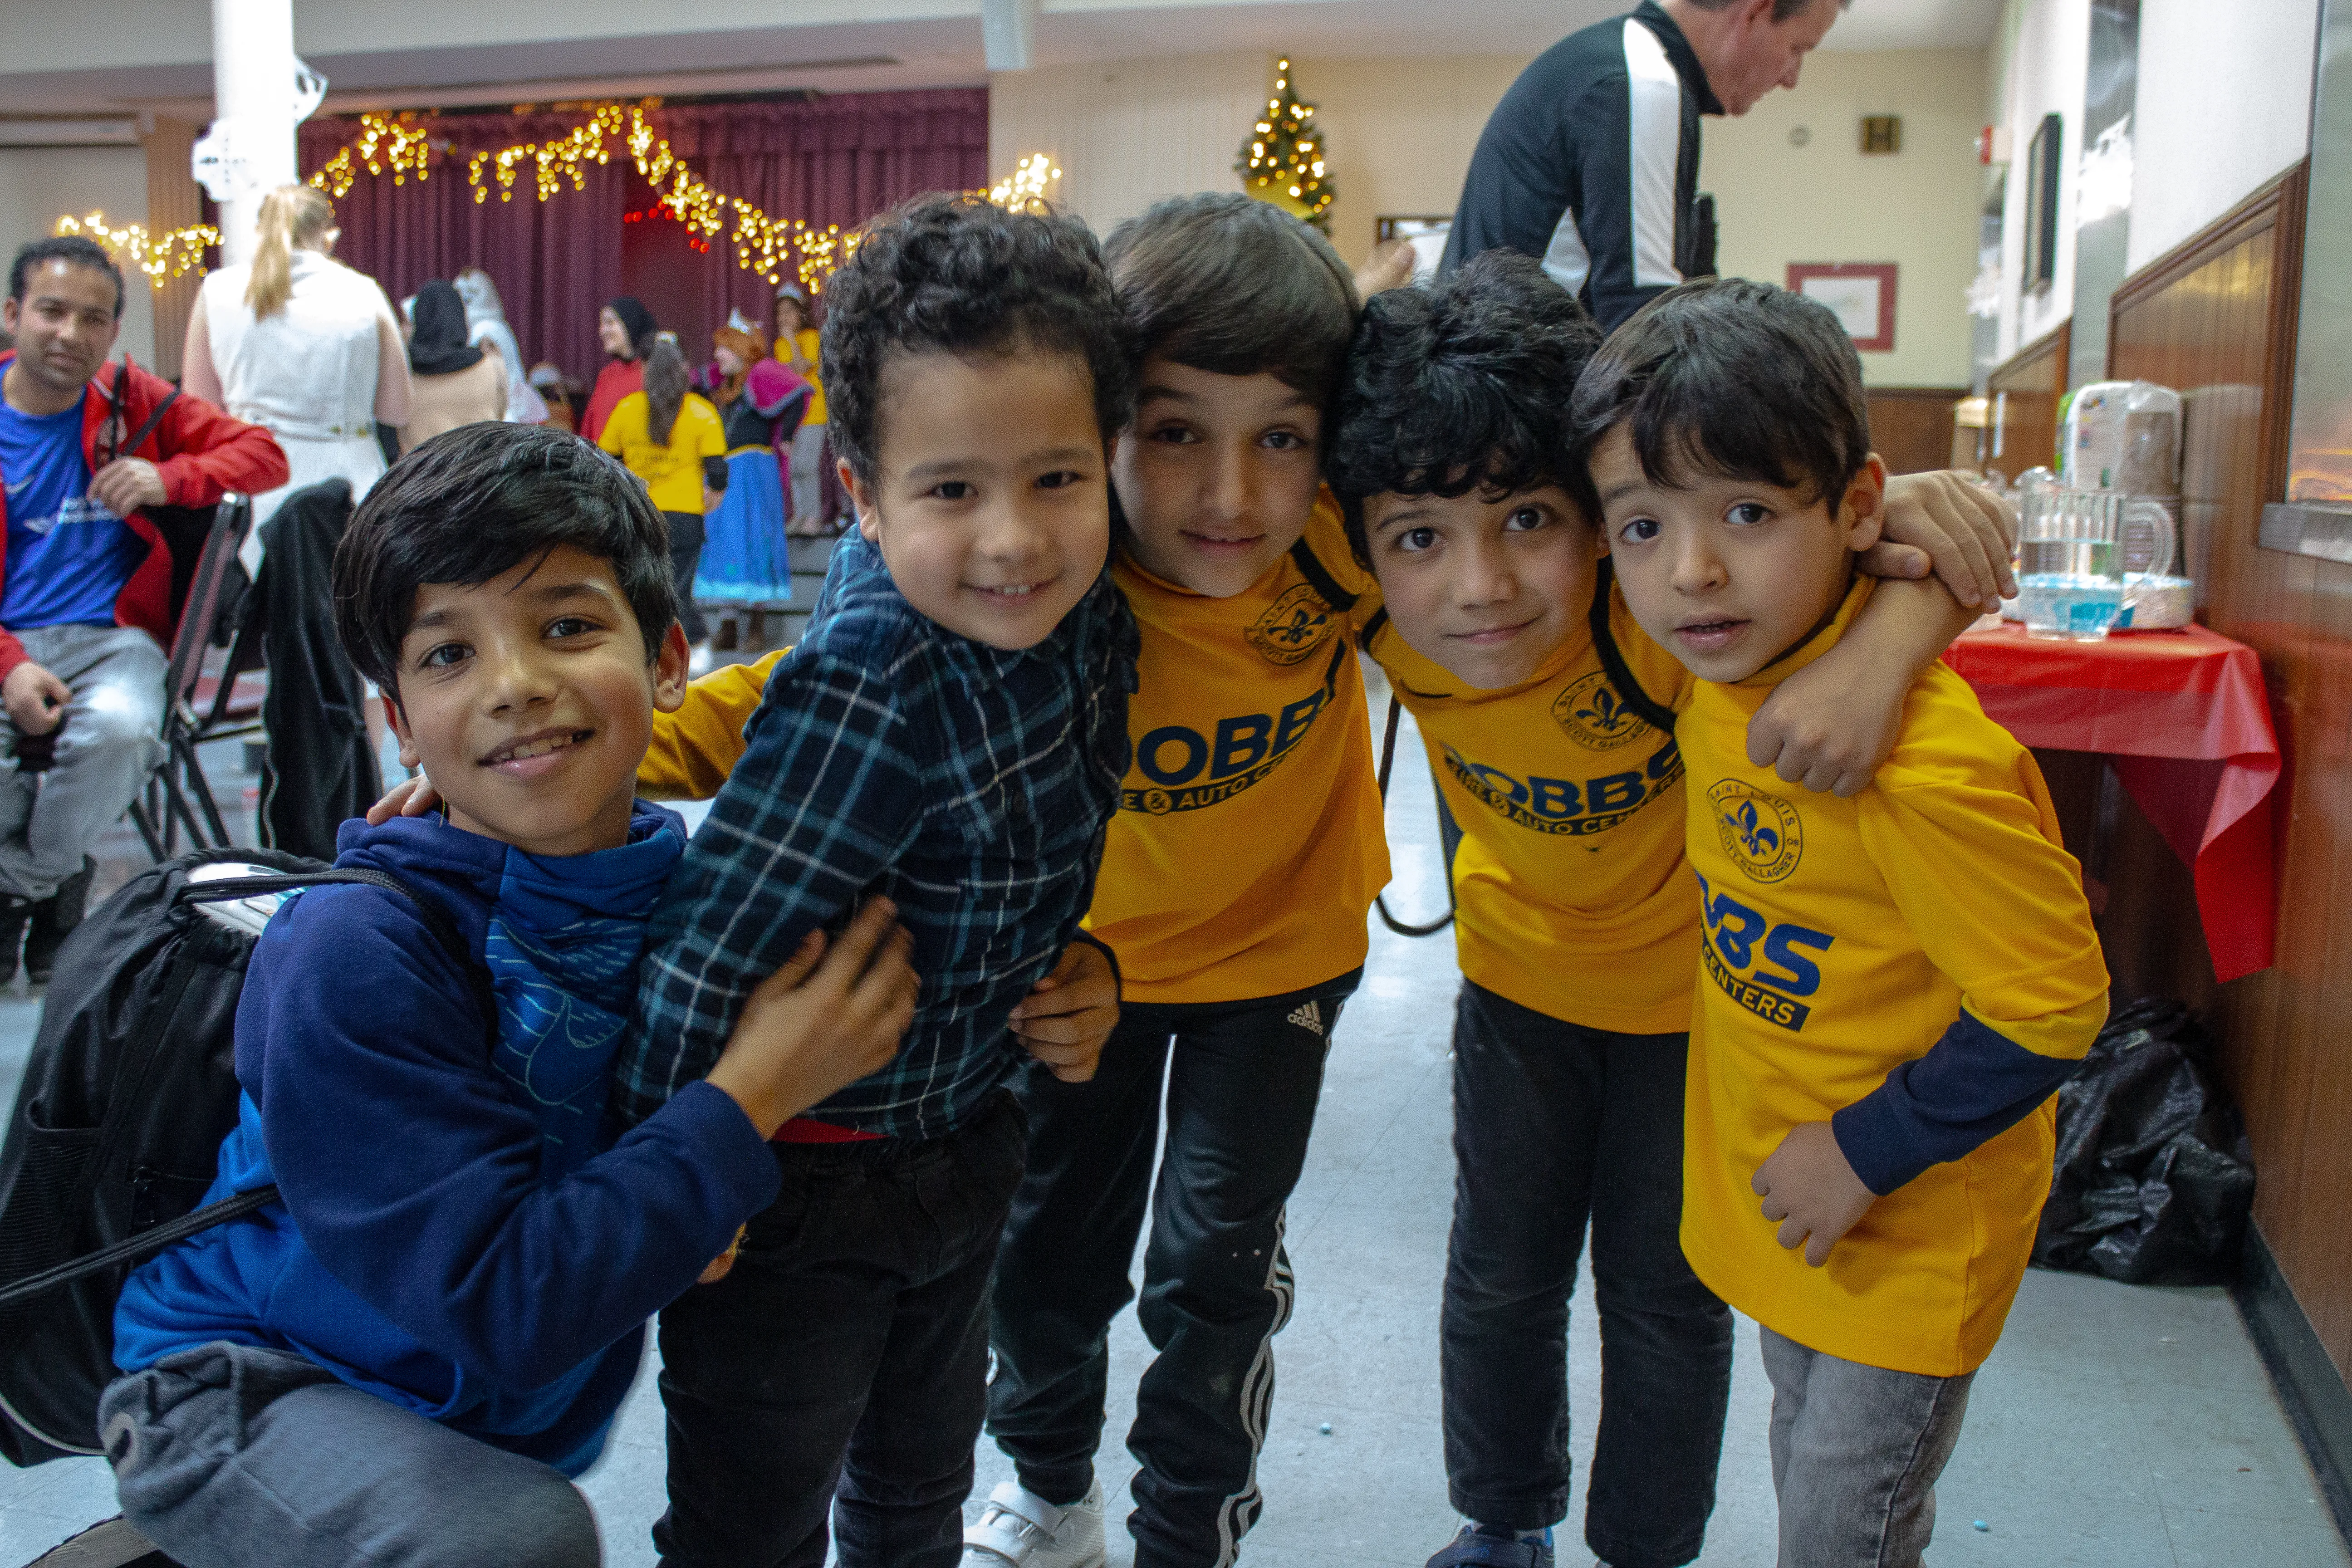 Children of Afghan immigrants to St. Louis play during a holiday party on Dec. 9, 2023.?w=200&h=150